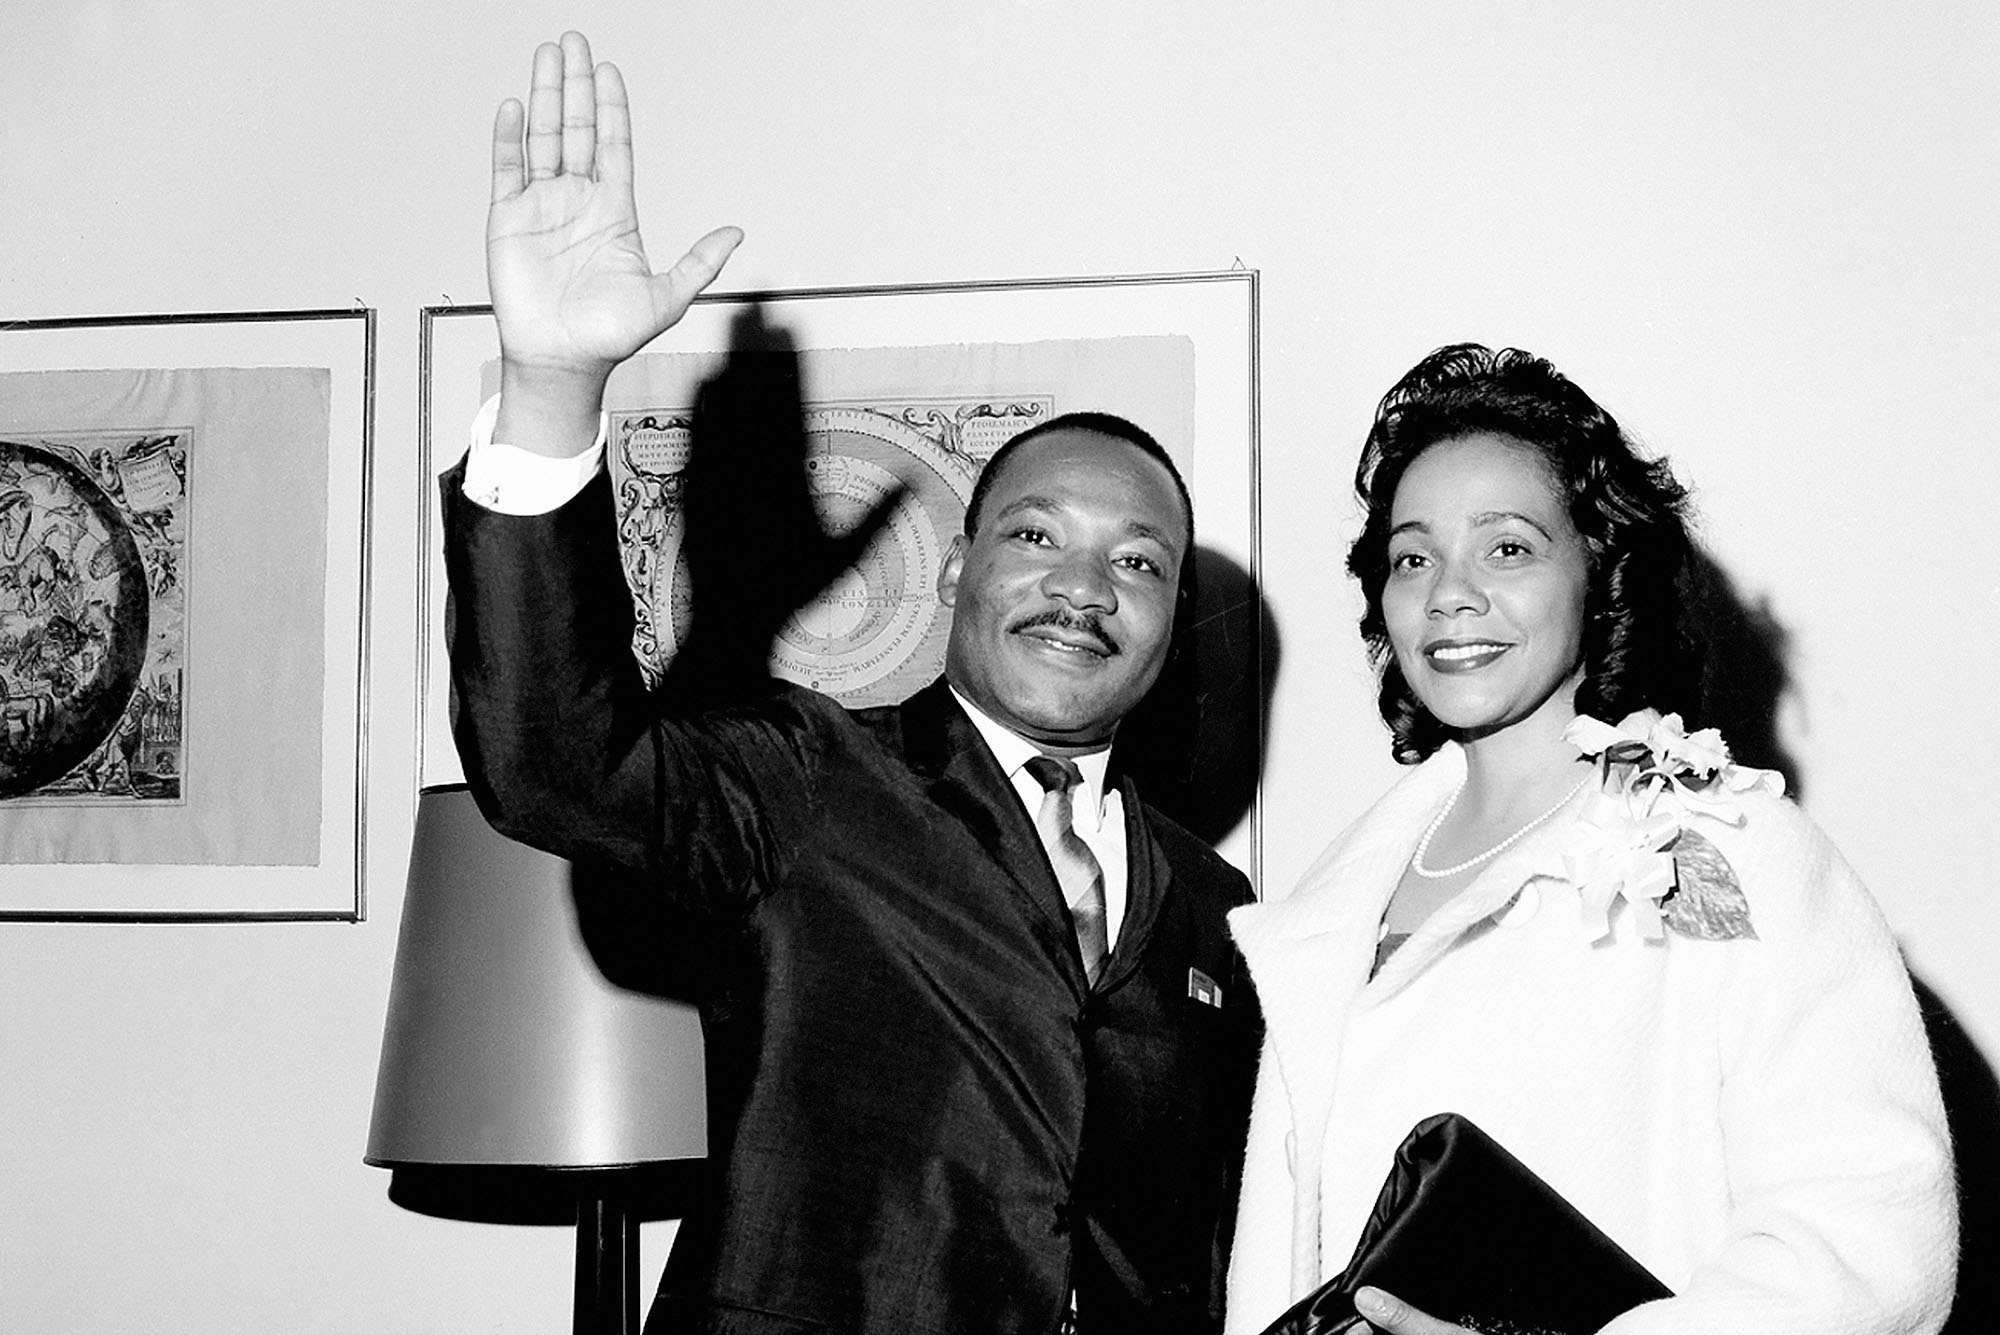 black and white photo of The Rev. Dr. Martin Luther King Jr. being accompanied by his wife, Coretta Scott King, as he appears at a press conference. His hand is raised and waving, as they both look on smiling